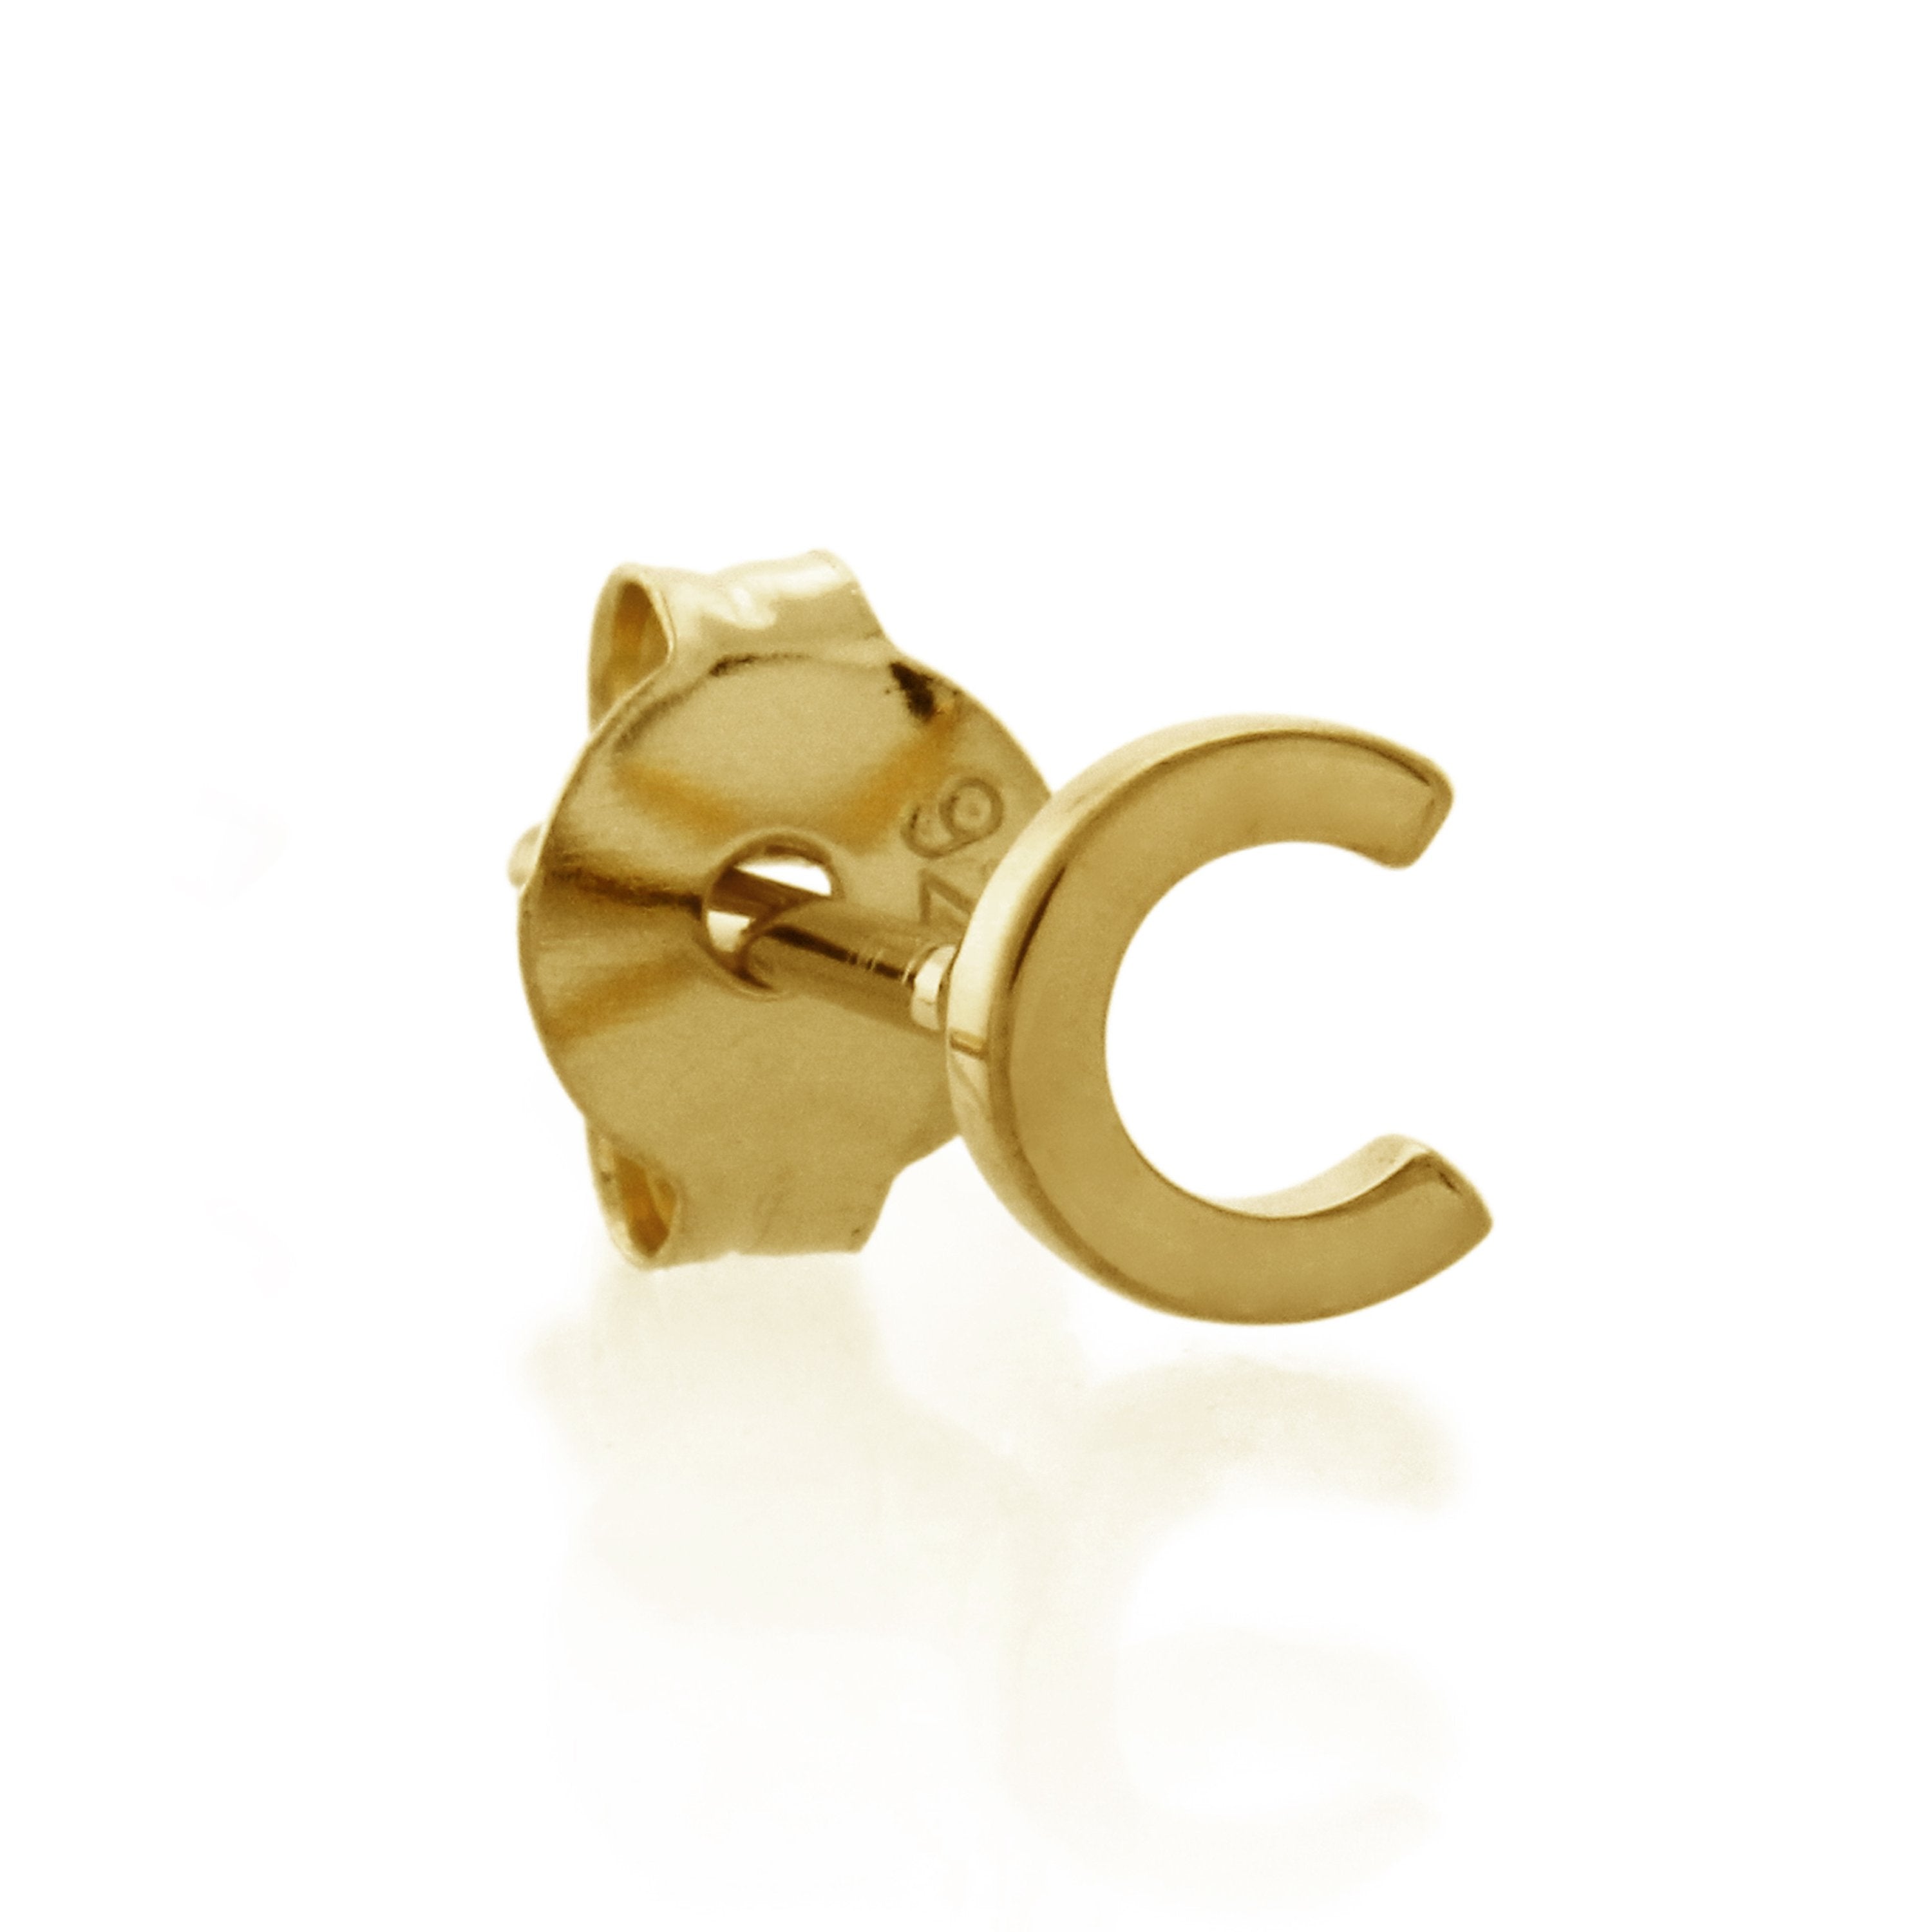 Sterling Silver Gold Plated Single Initial Stud Earring